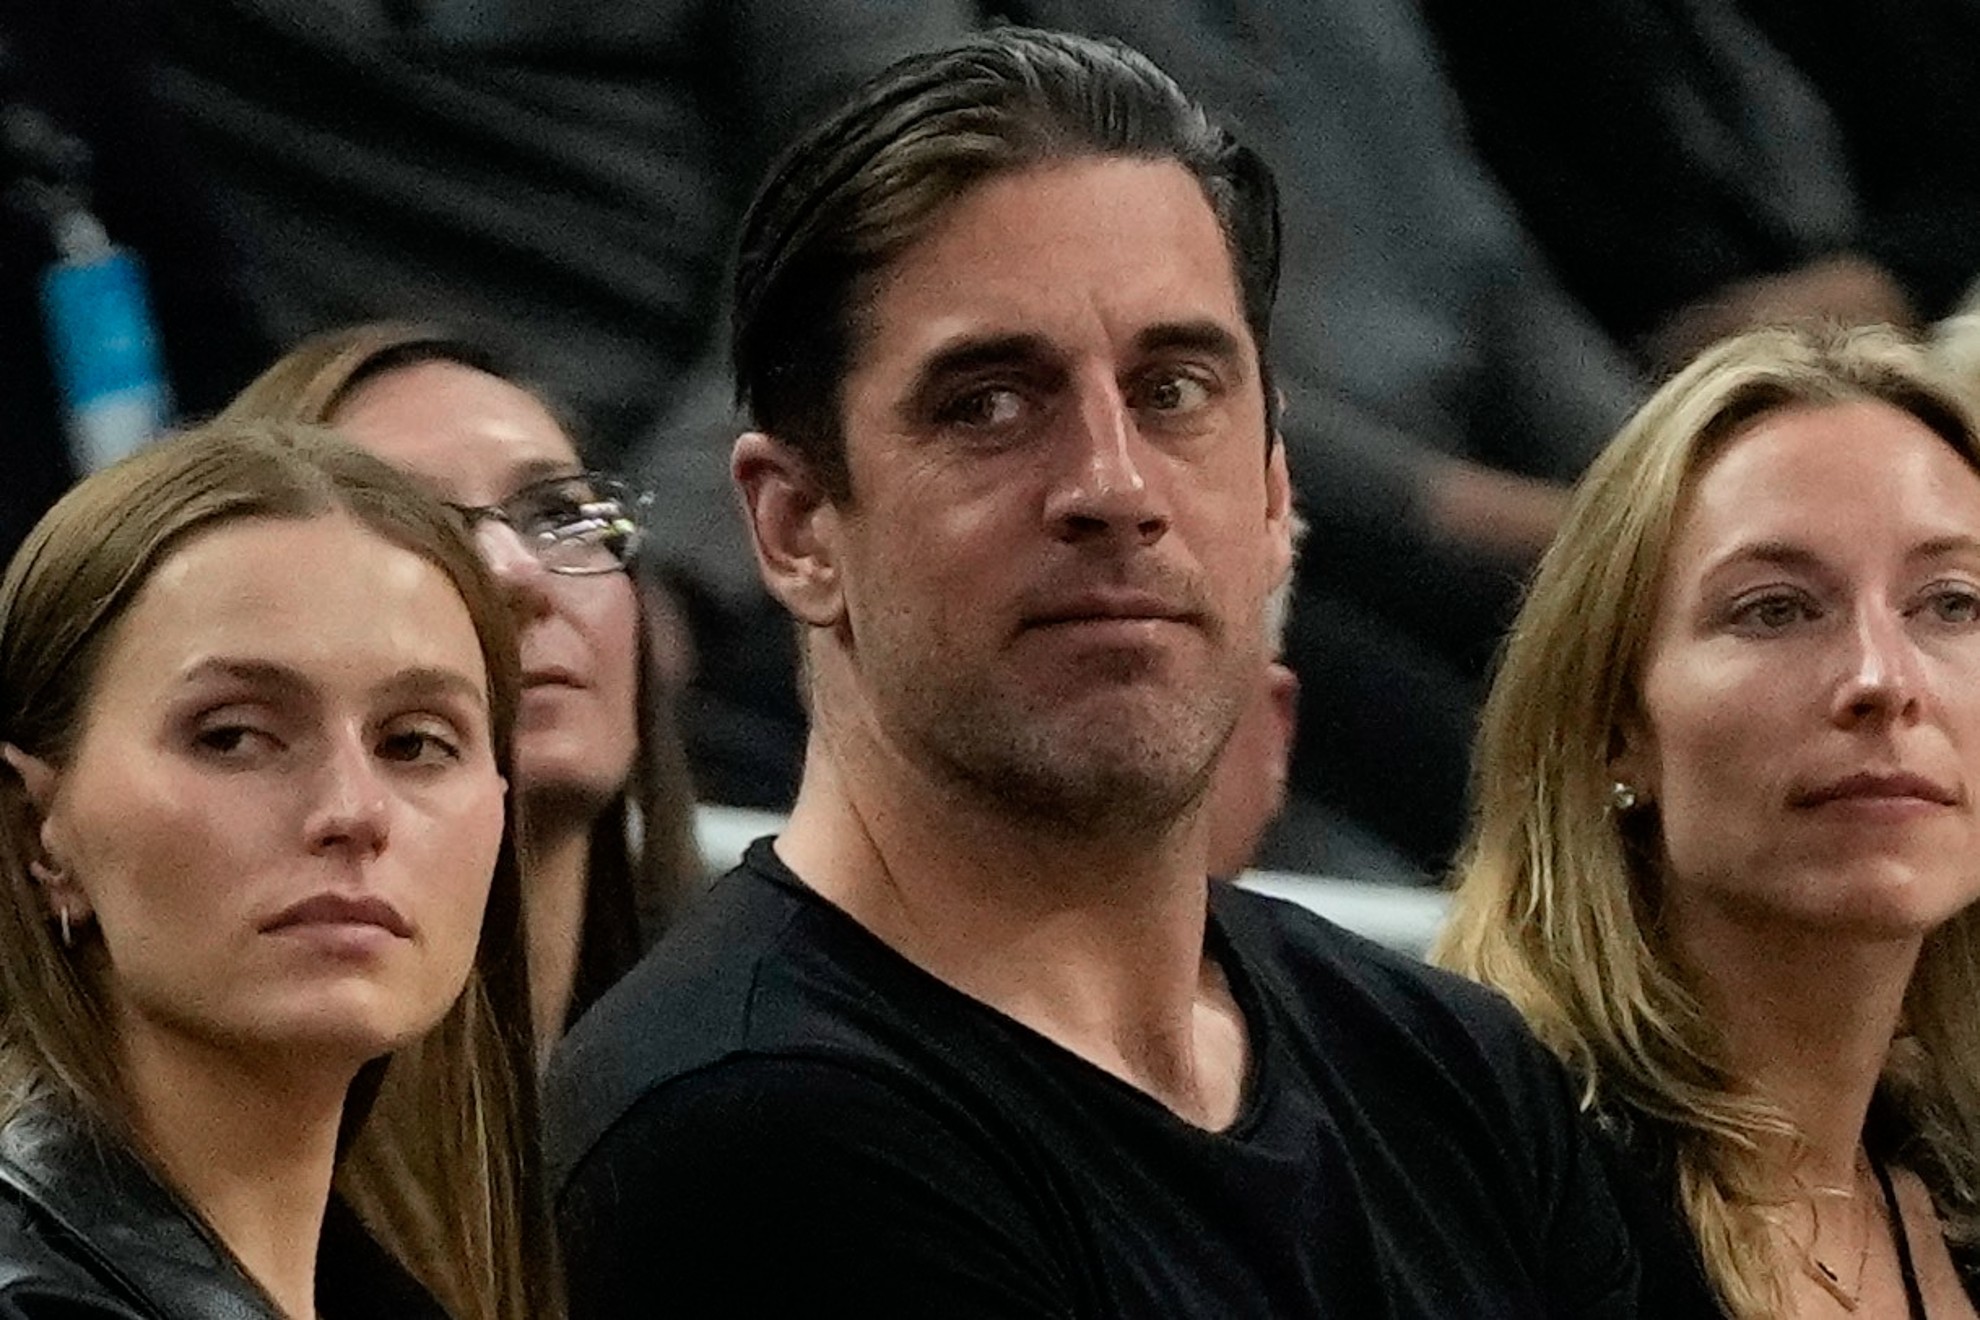 Aaron Rodgers at the Bucks game.